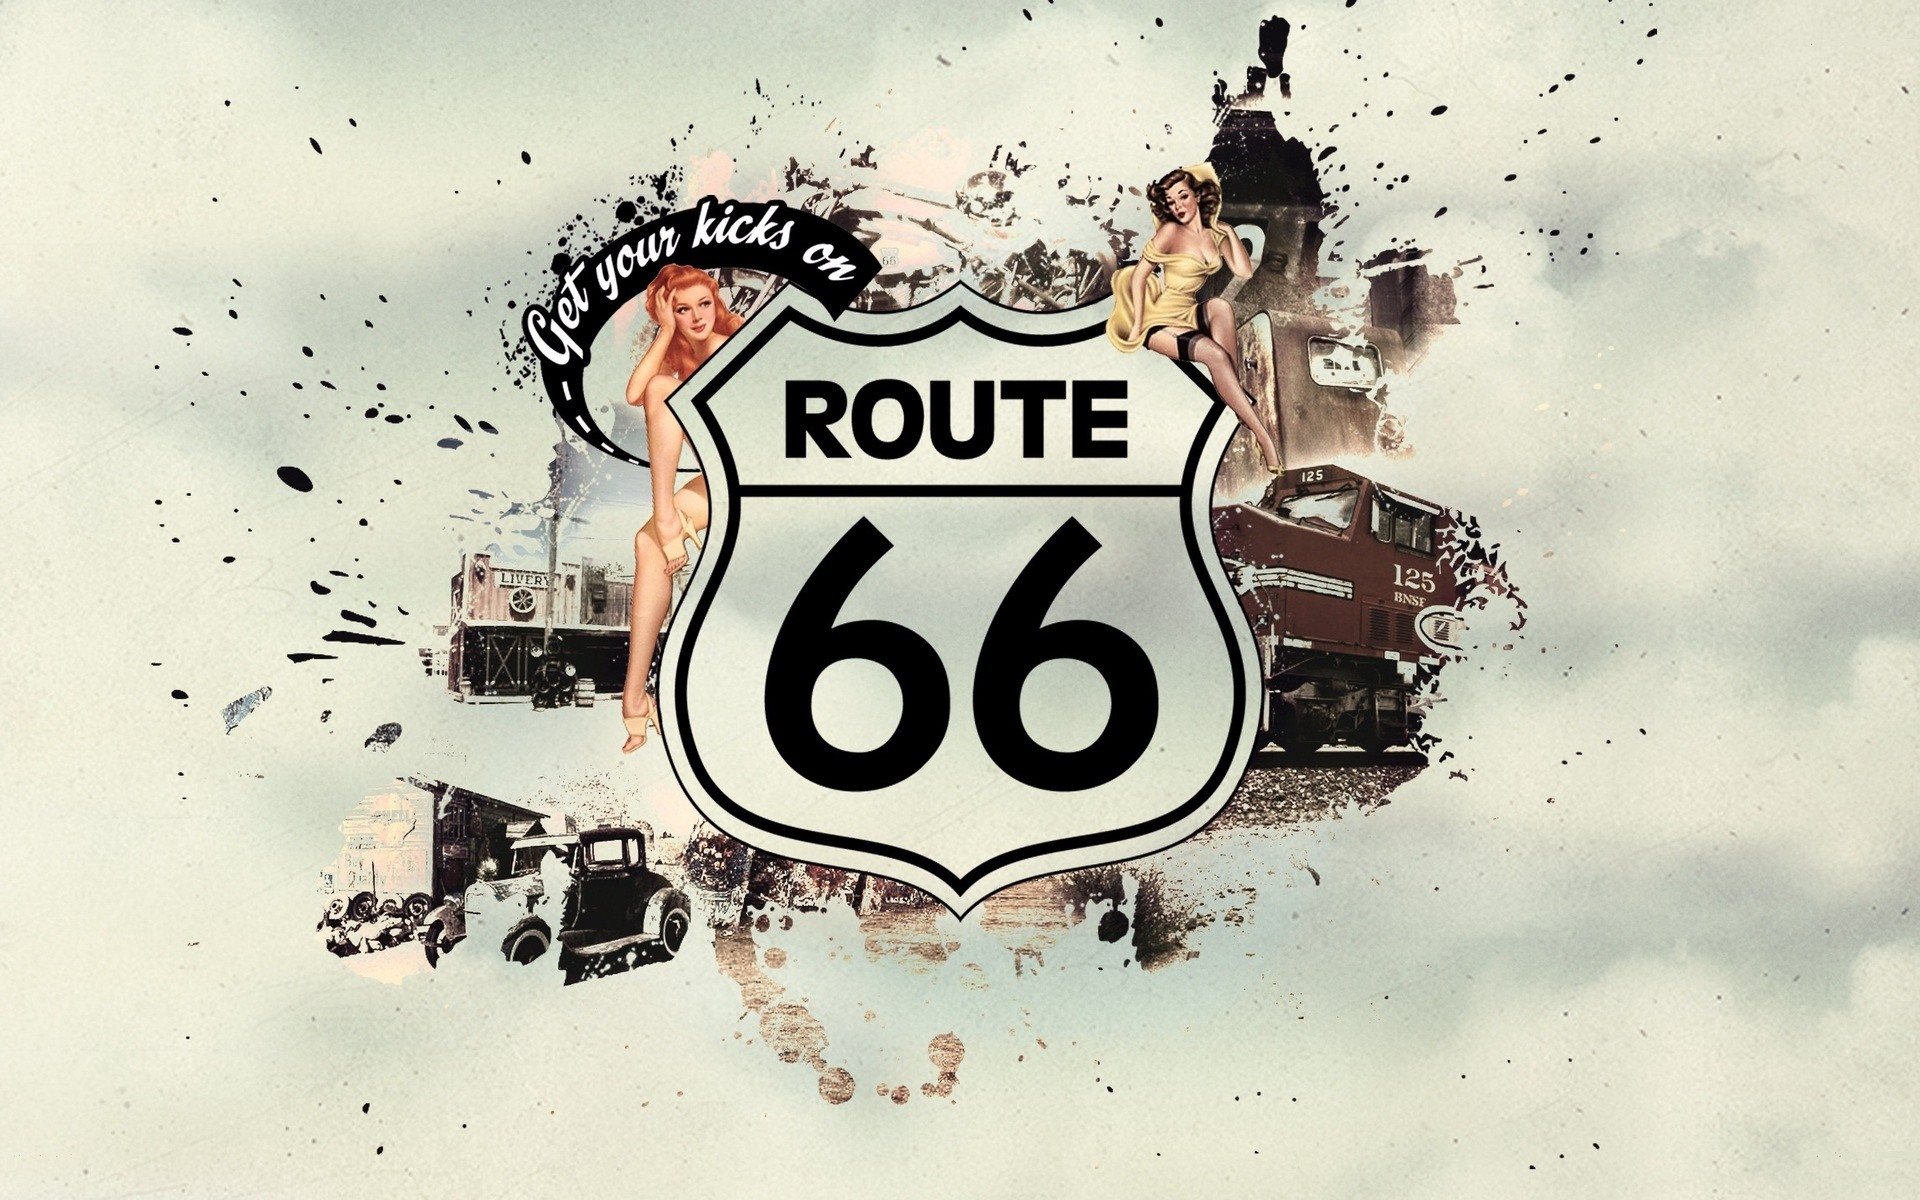 Route Wallpaper Submited Image